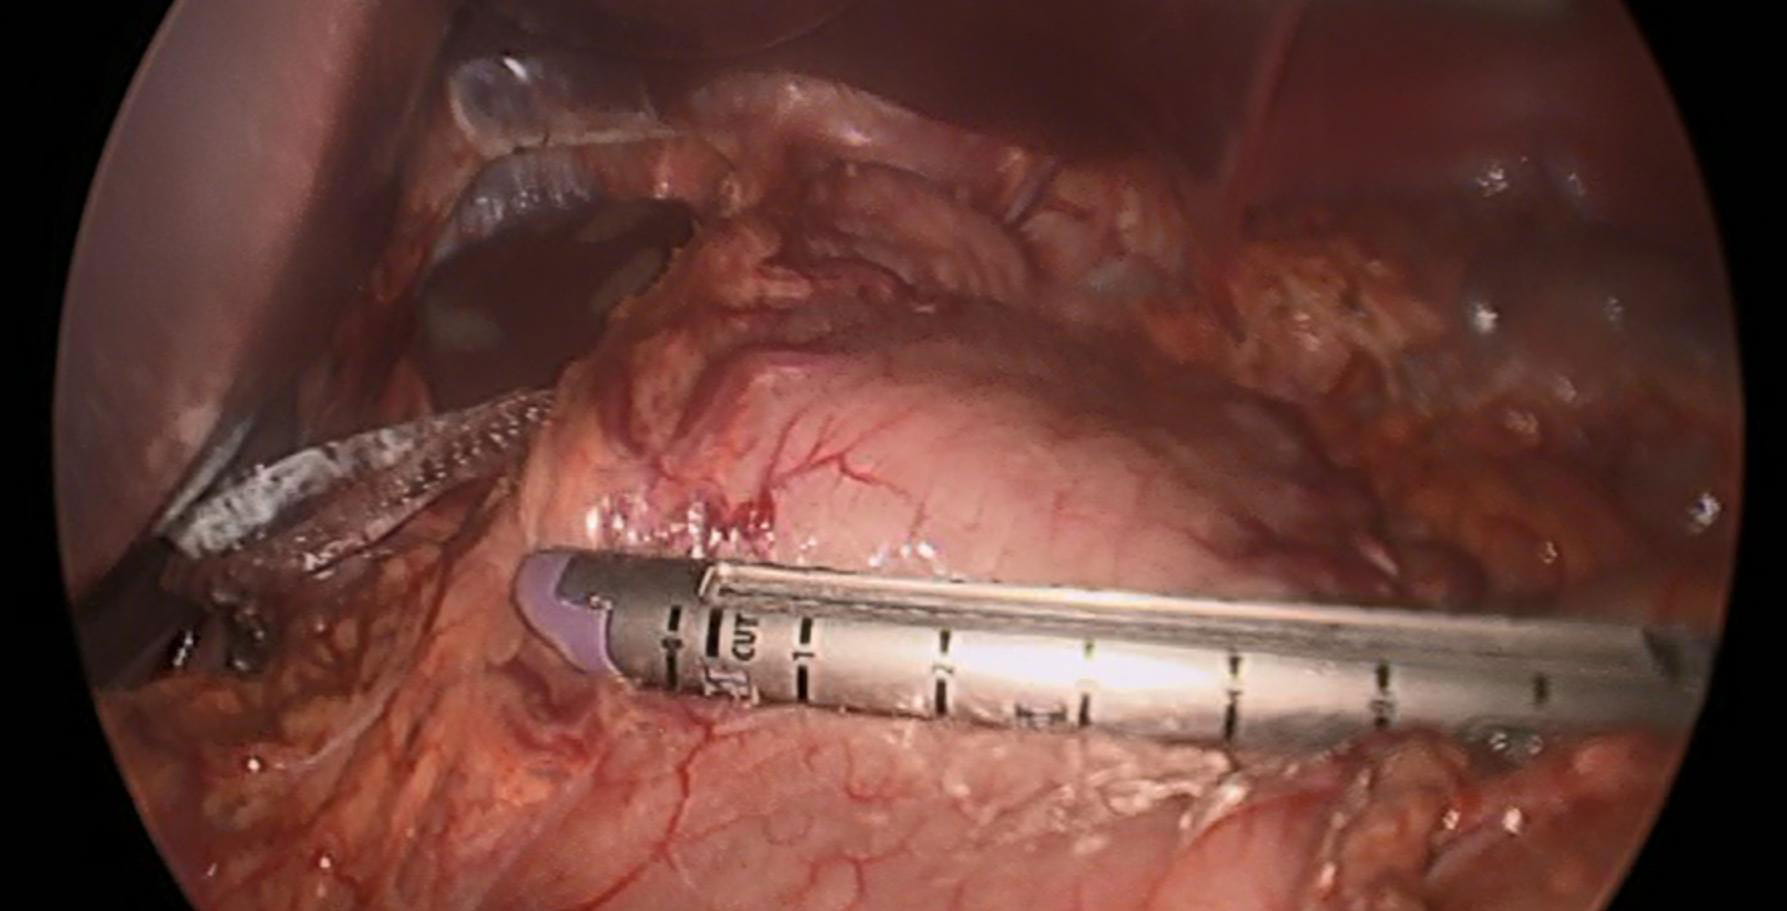 Laparoscopic view of a surgical stapler on the stomach